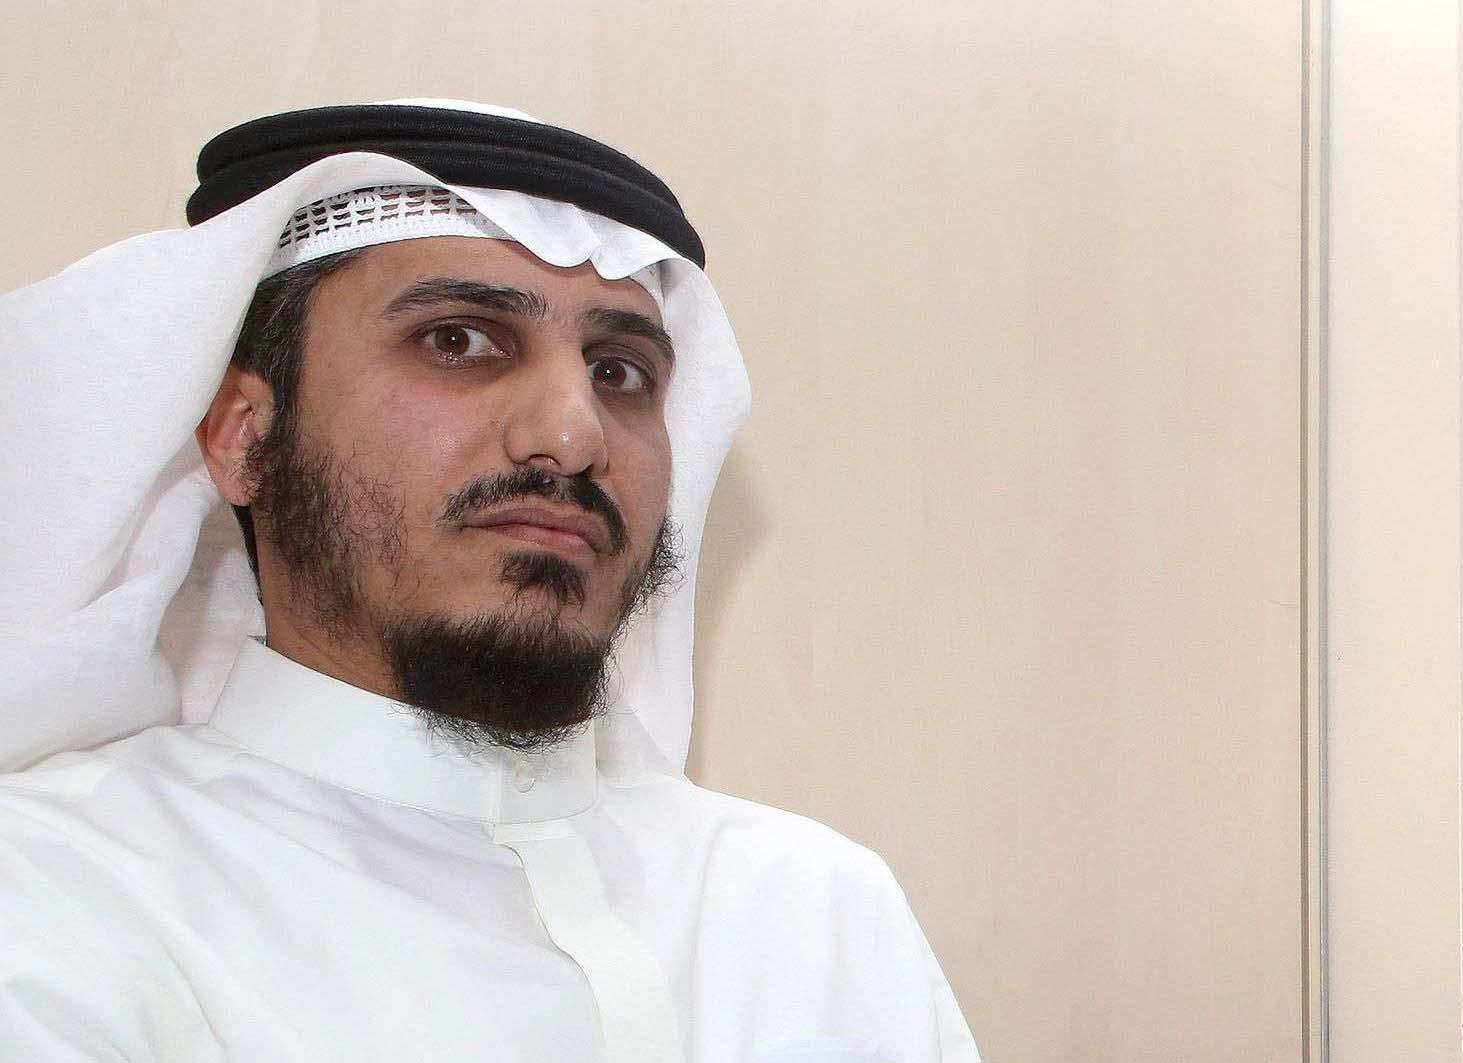 Al-Dahoum has become notorious in Kuwait for his vociferous protests against the government